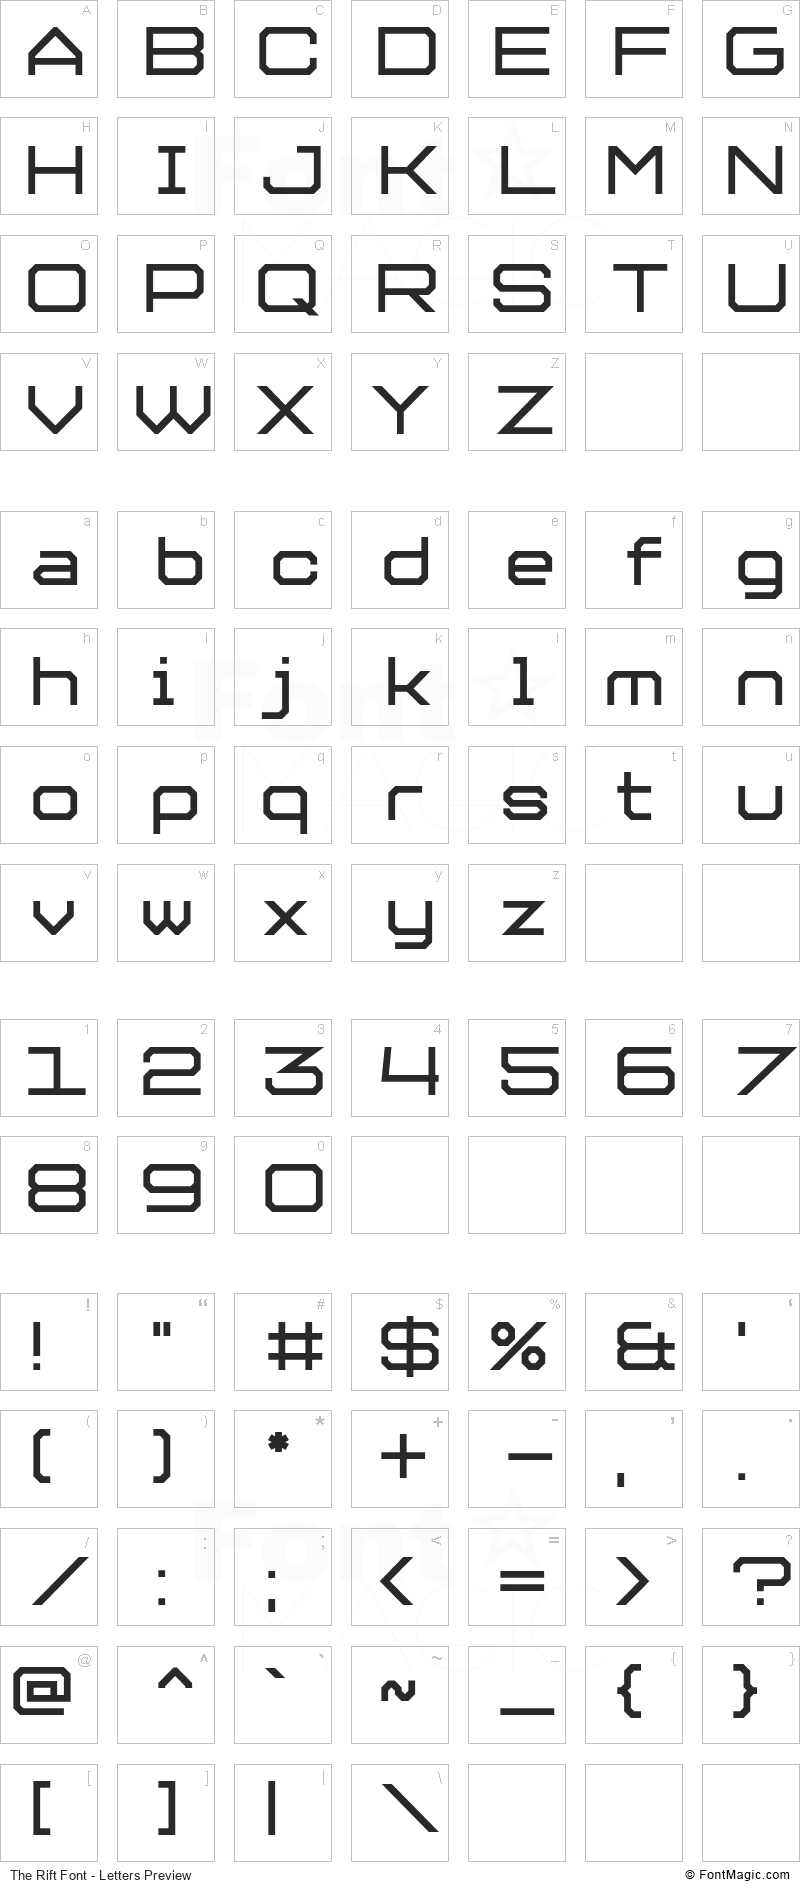 The Rift Font - All Latters Preview Chart